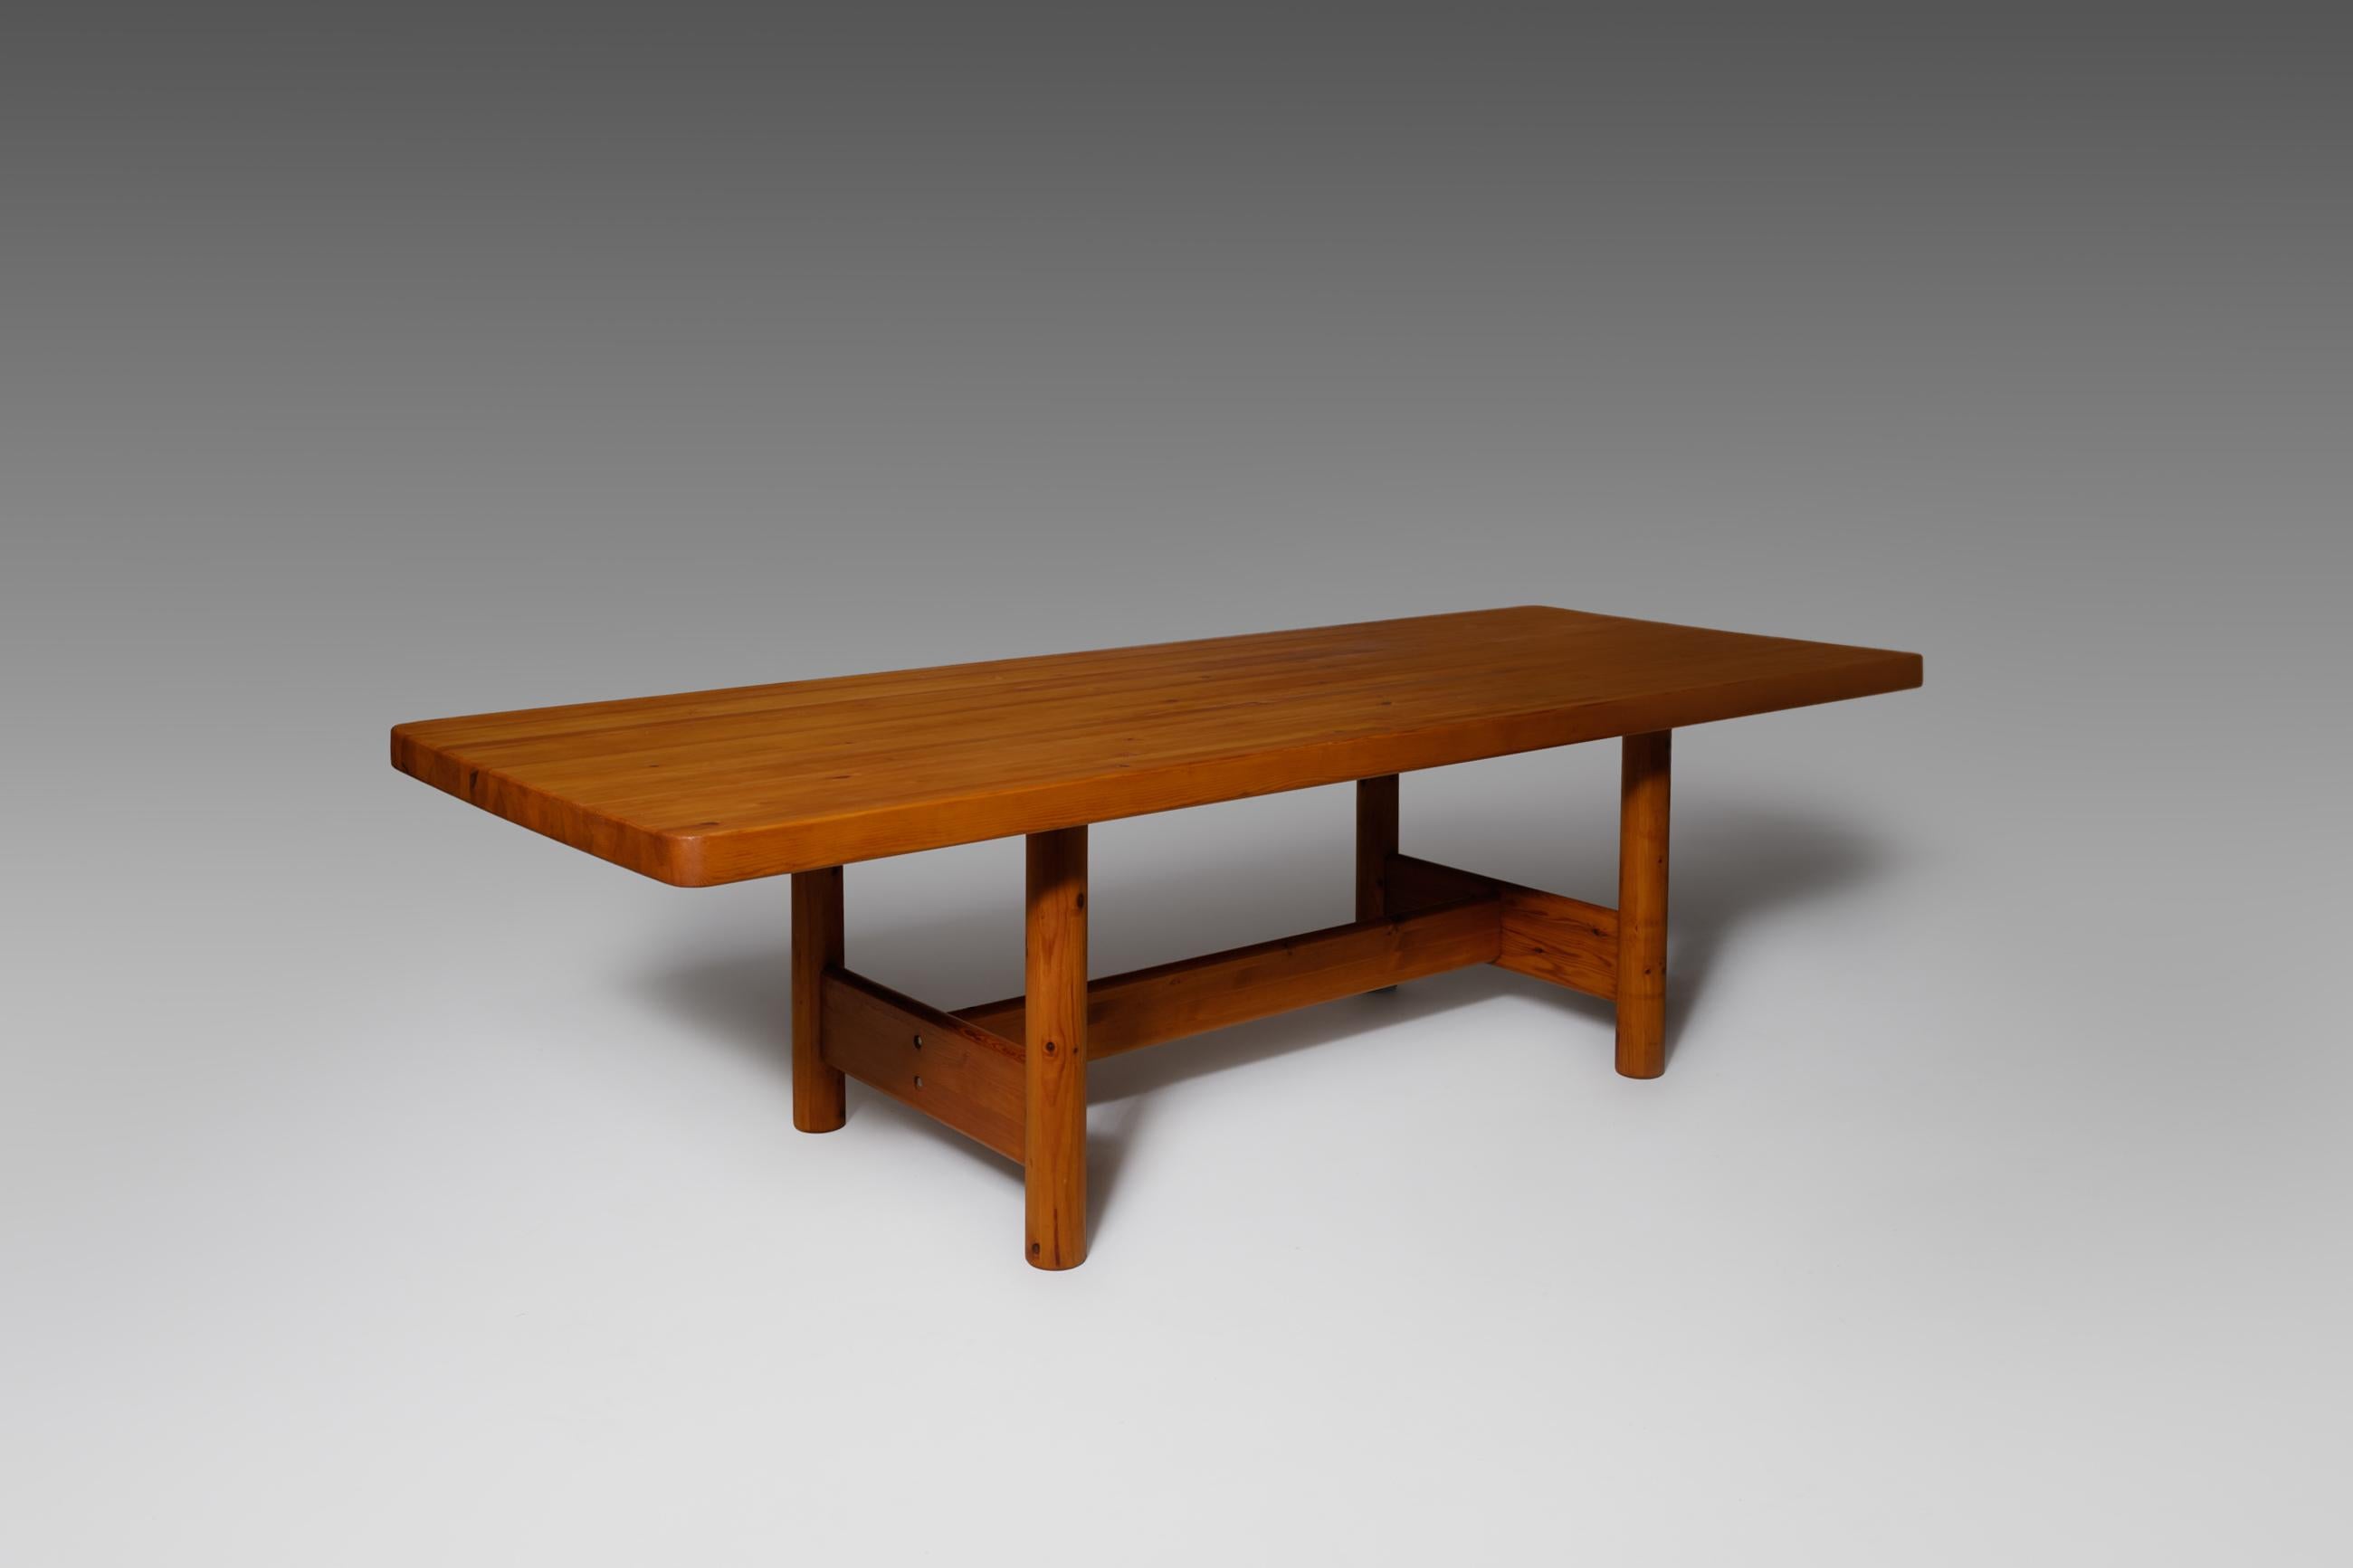 Rare extra large dining table by Rainer Daumiller, Denmark, 1970s. The large and heavy table top is constructed of layers of solid pine slats which creates an interesting pattern. The large top lays on modest strong base with four solid cylinder